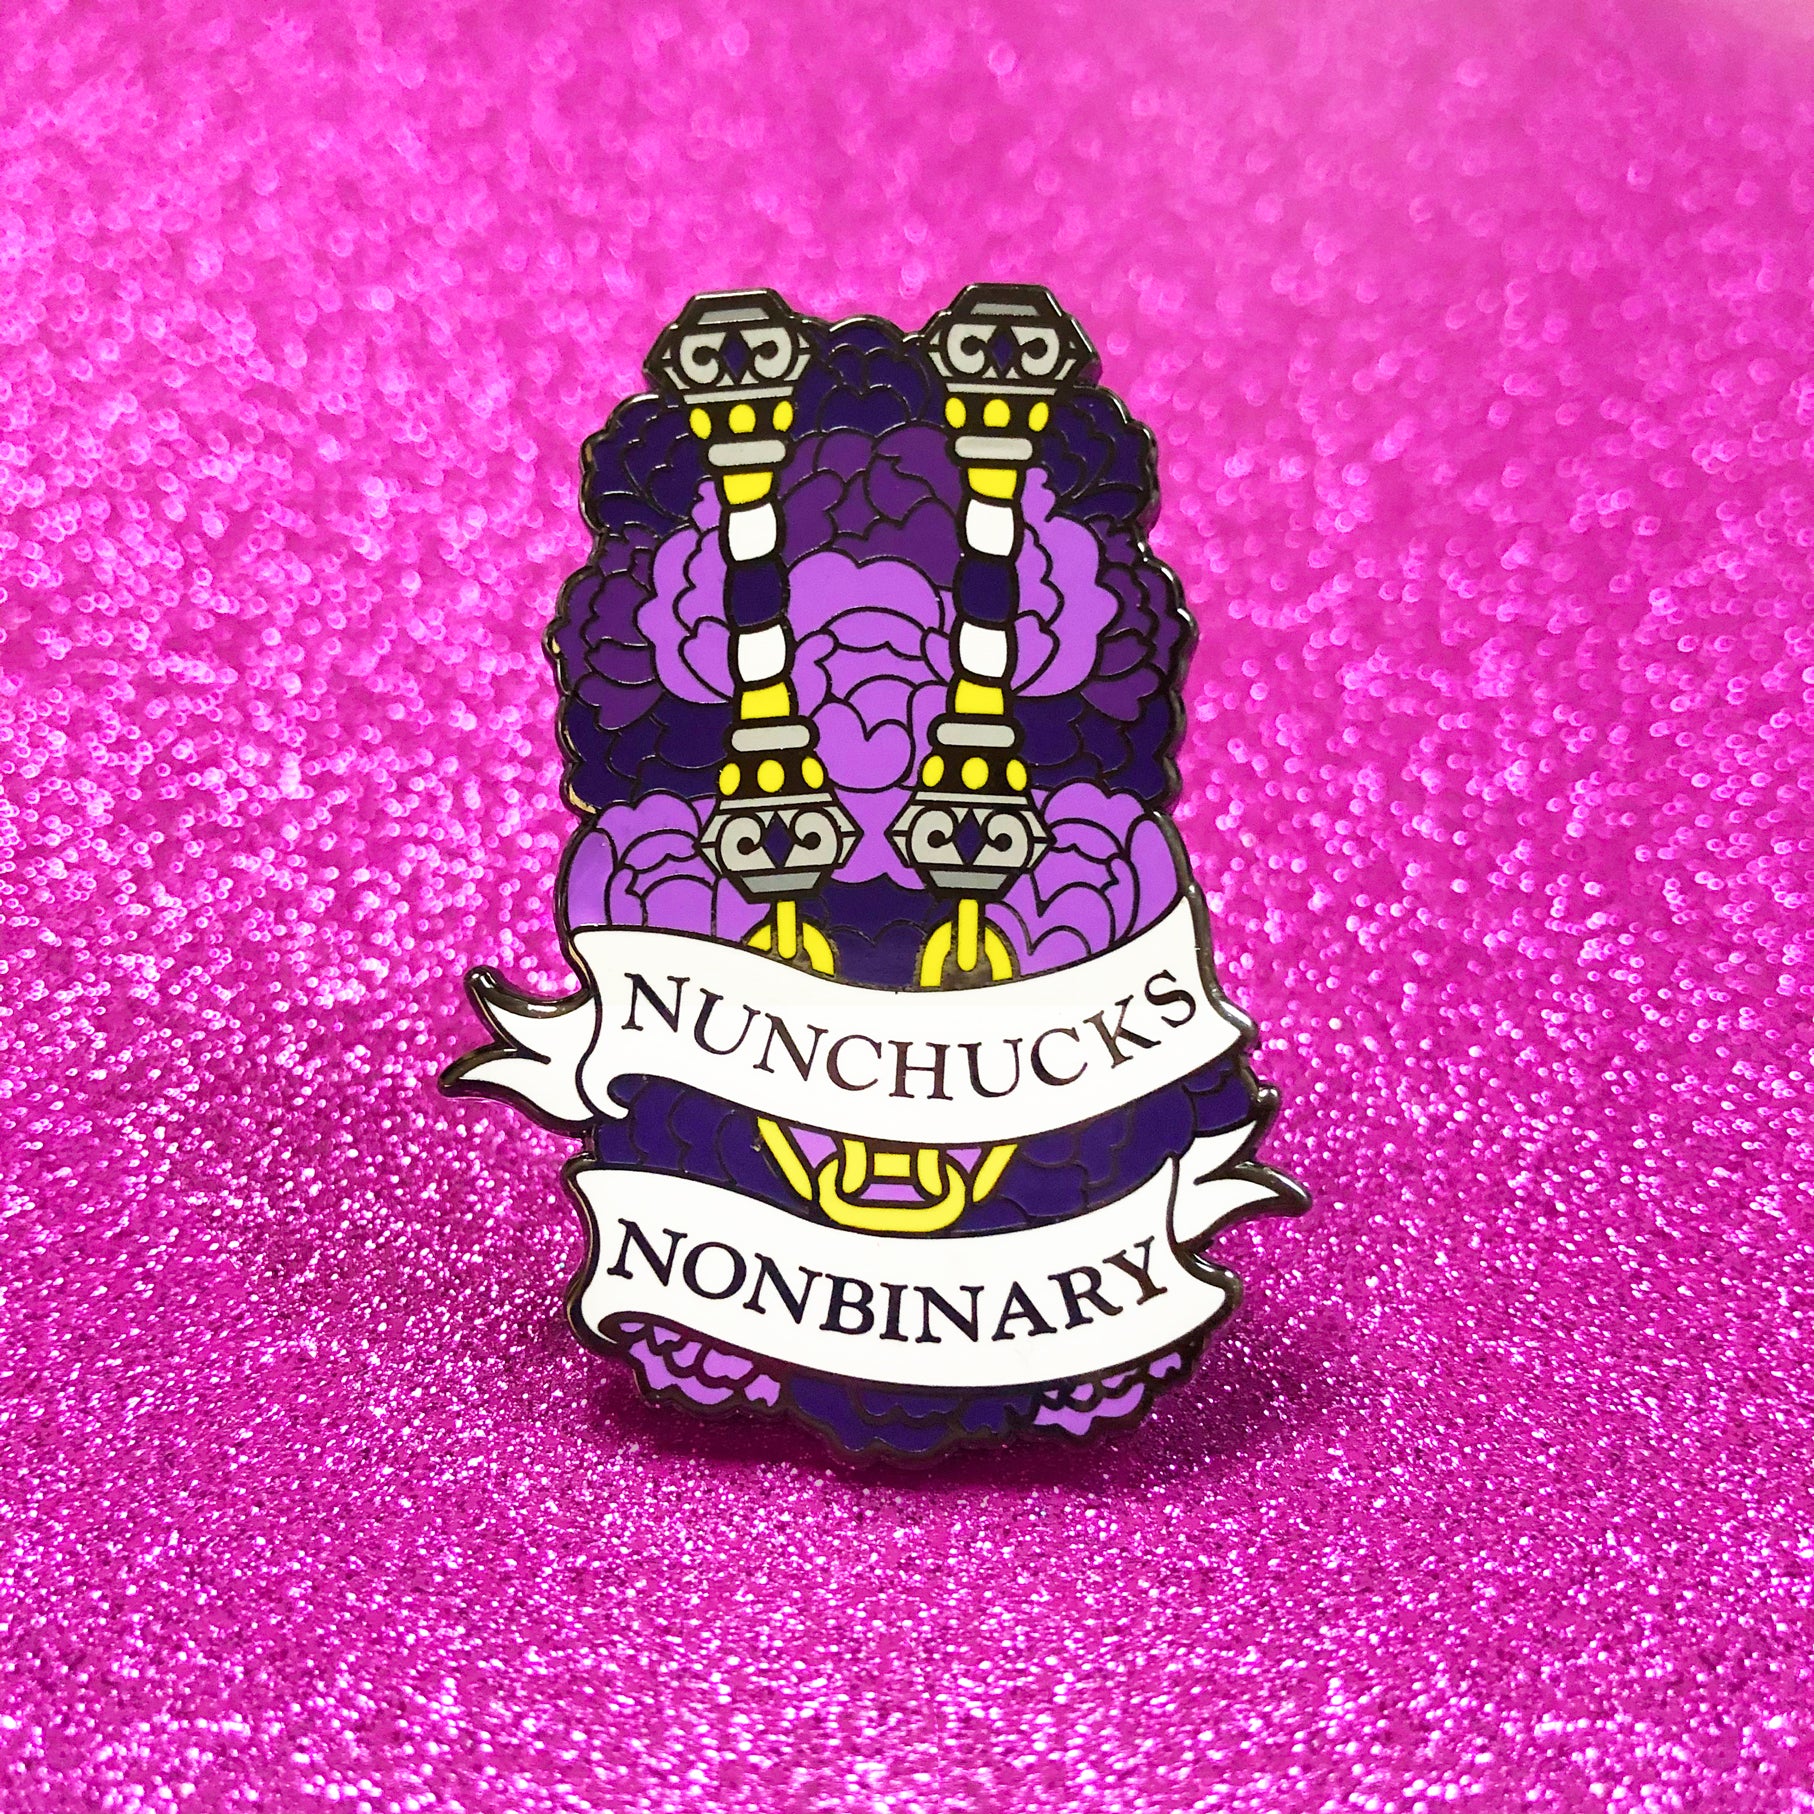 The goldcast pin features a pair of purple, white, and bright yellow nunchucks in a bed of purple flowers, representing the nonbinary flag colors. A ribbon trails across the front and reads "Nunchucks Nonbinary."